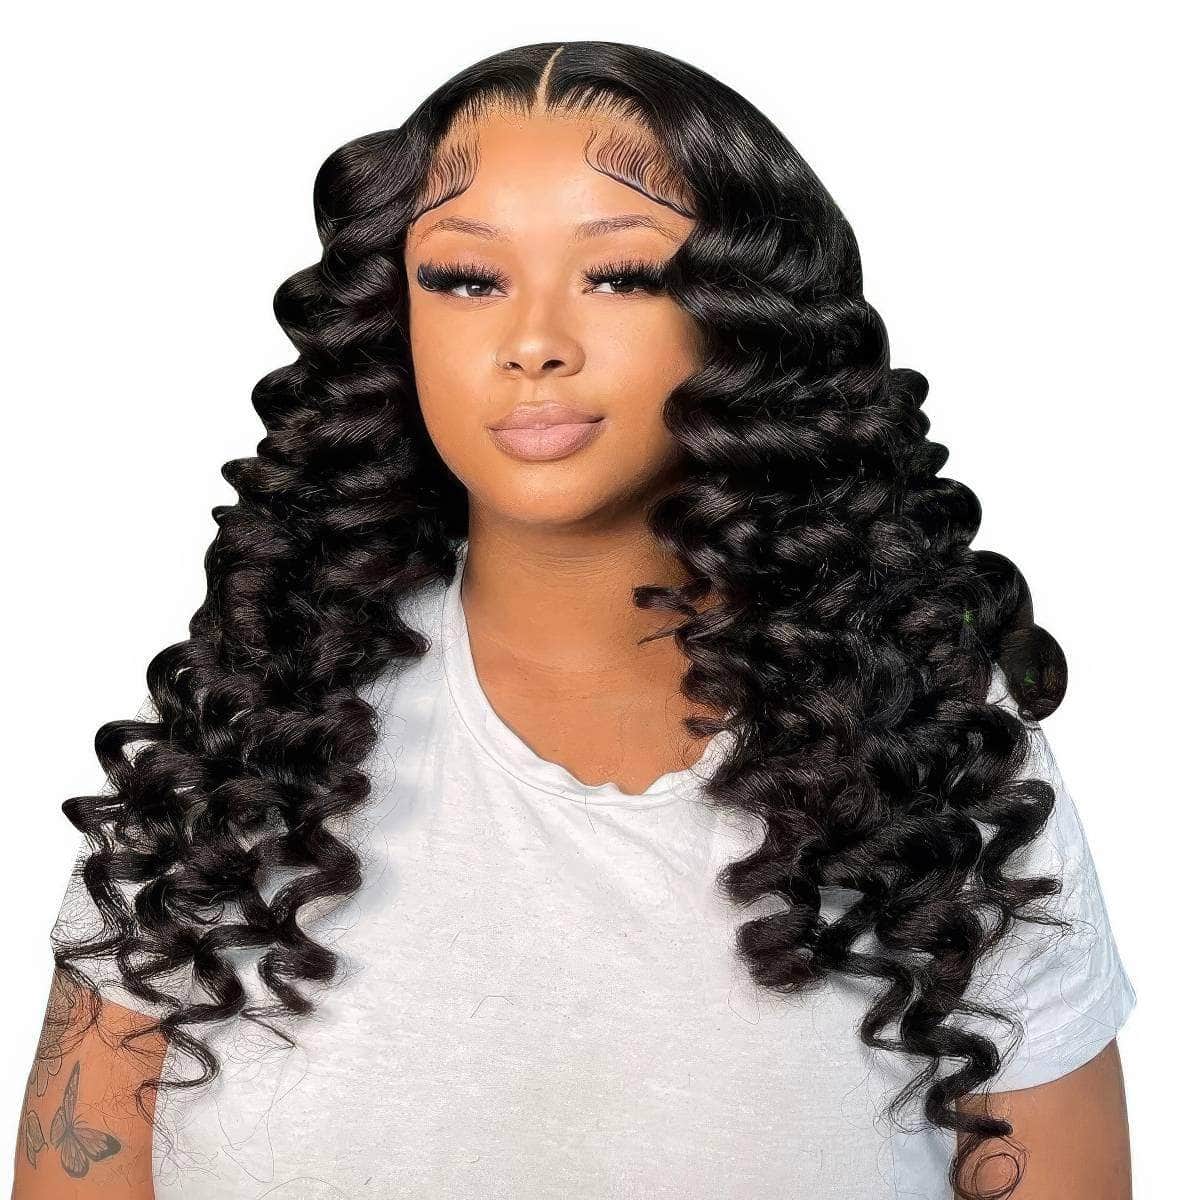 Wand Curl Wear And Go Glueless Wig - 100% Human Hair, Ready To Wear, Preplucked Glueless Curly Wigs for Women Wear Go Glueless Wig / 16inches